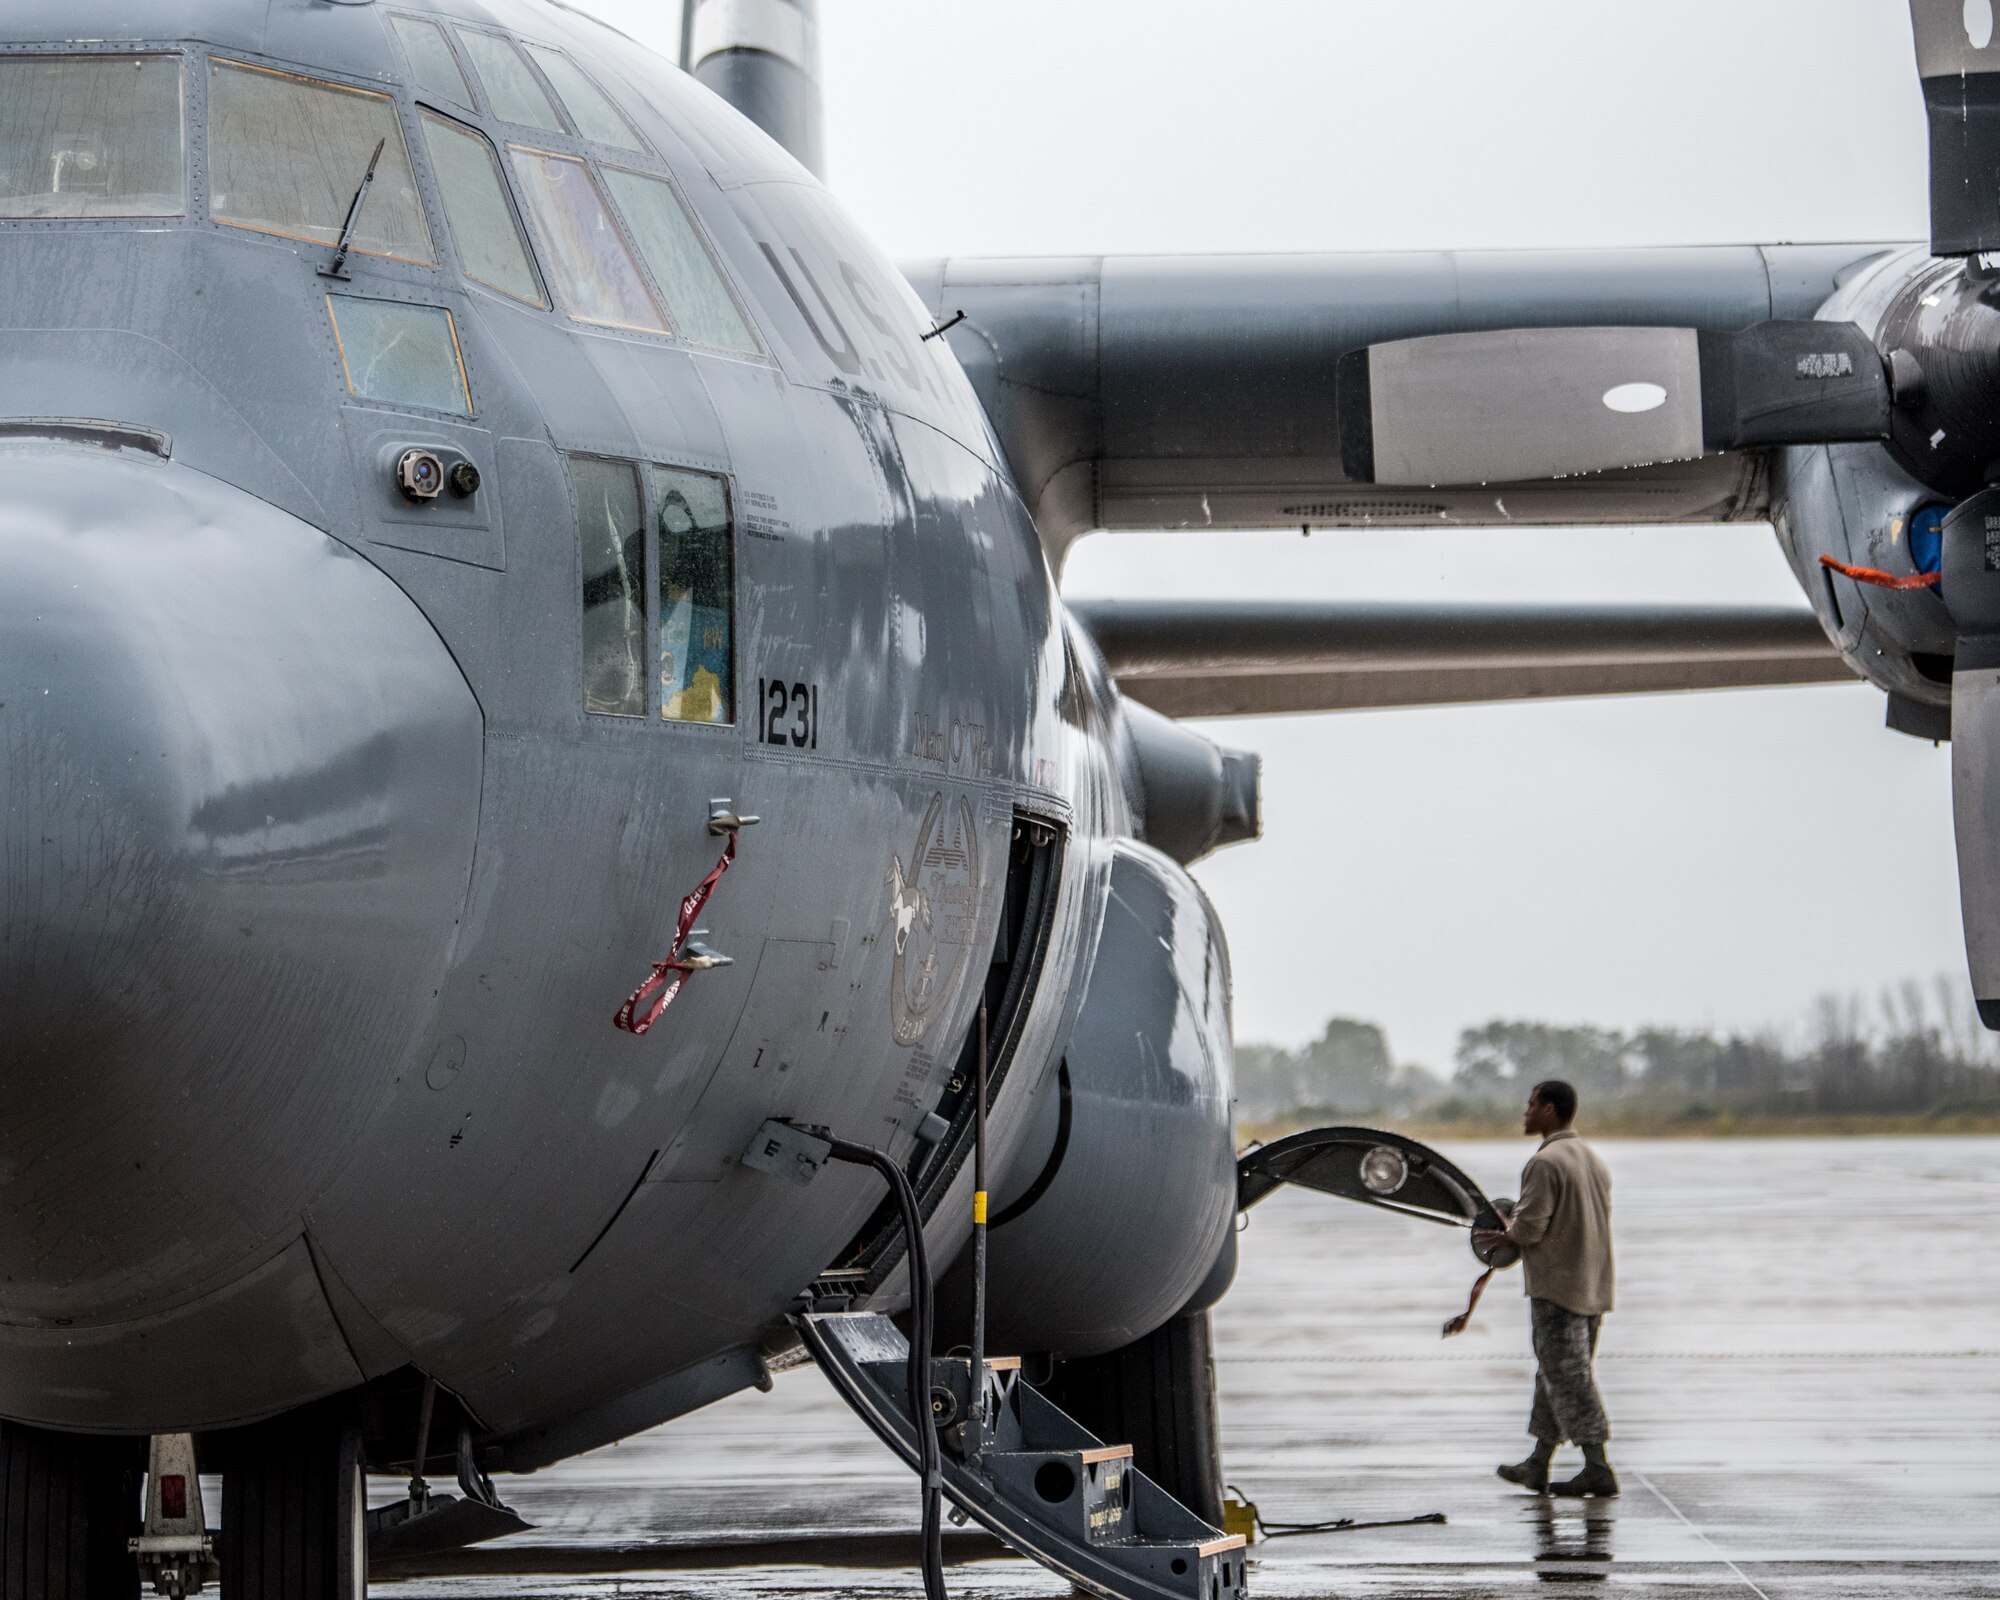 Senior Airman Josiah Hatcher, a crew chief with the Kentucky Air National Guard’s 123rd Maintenance Group, prepares a C-130 Hercules aircraft for flight formation training in Pisa, Italy, Nov. 3, 2019. The sortie was part of Mangusta 19, a bi-lateral exercise with the Italian Army designed to promote readiness and interoperability among NATO allies. (U.S. Air National Guard photo by Senior Airman Chloe Ochs)